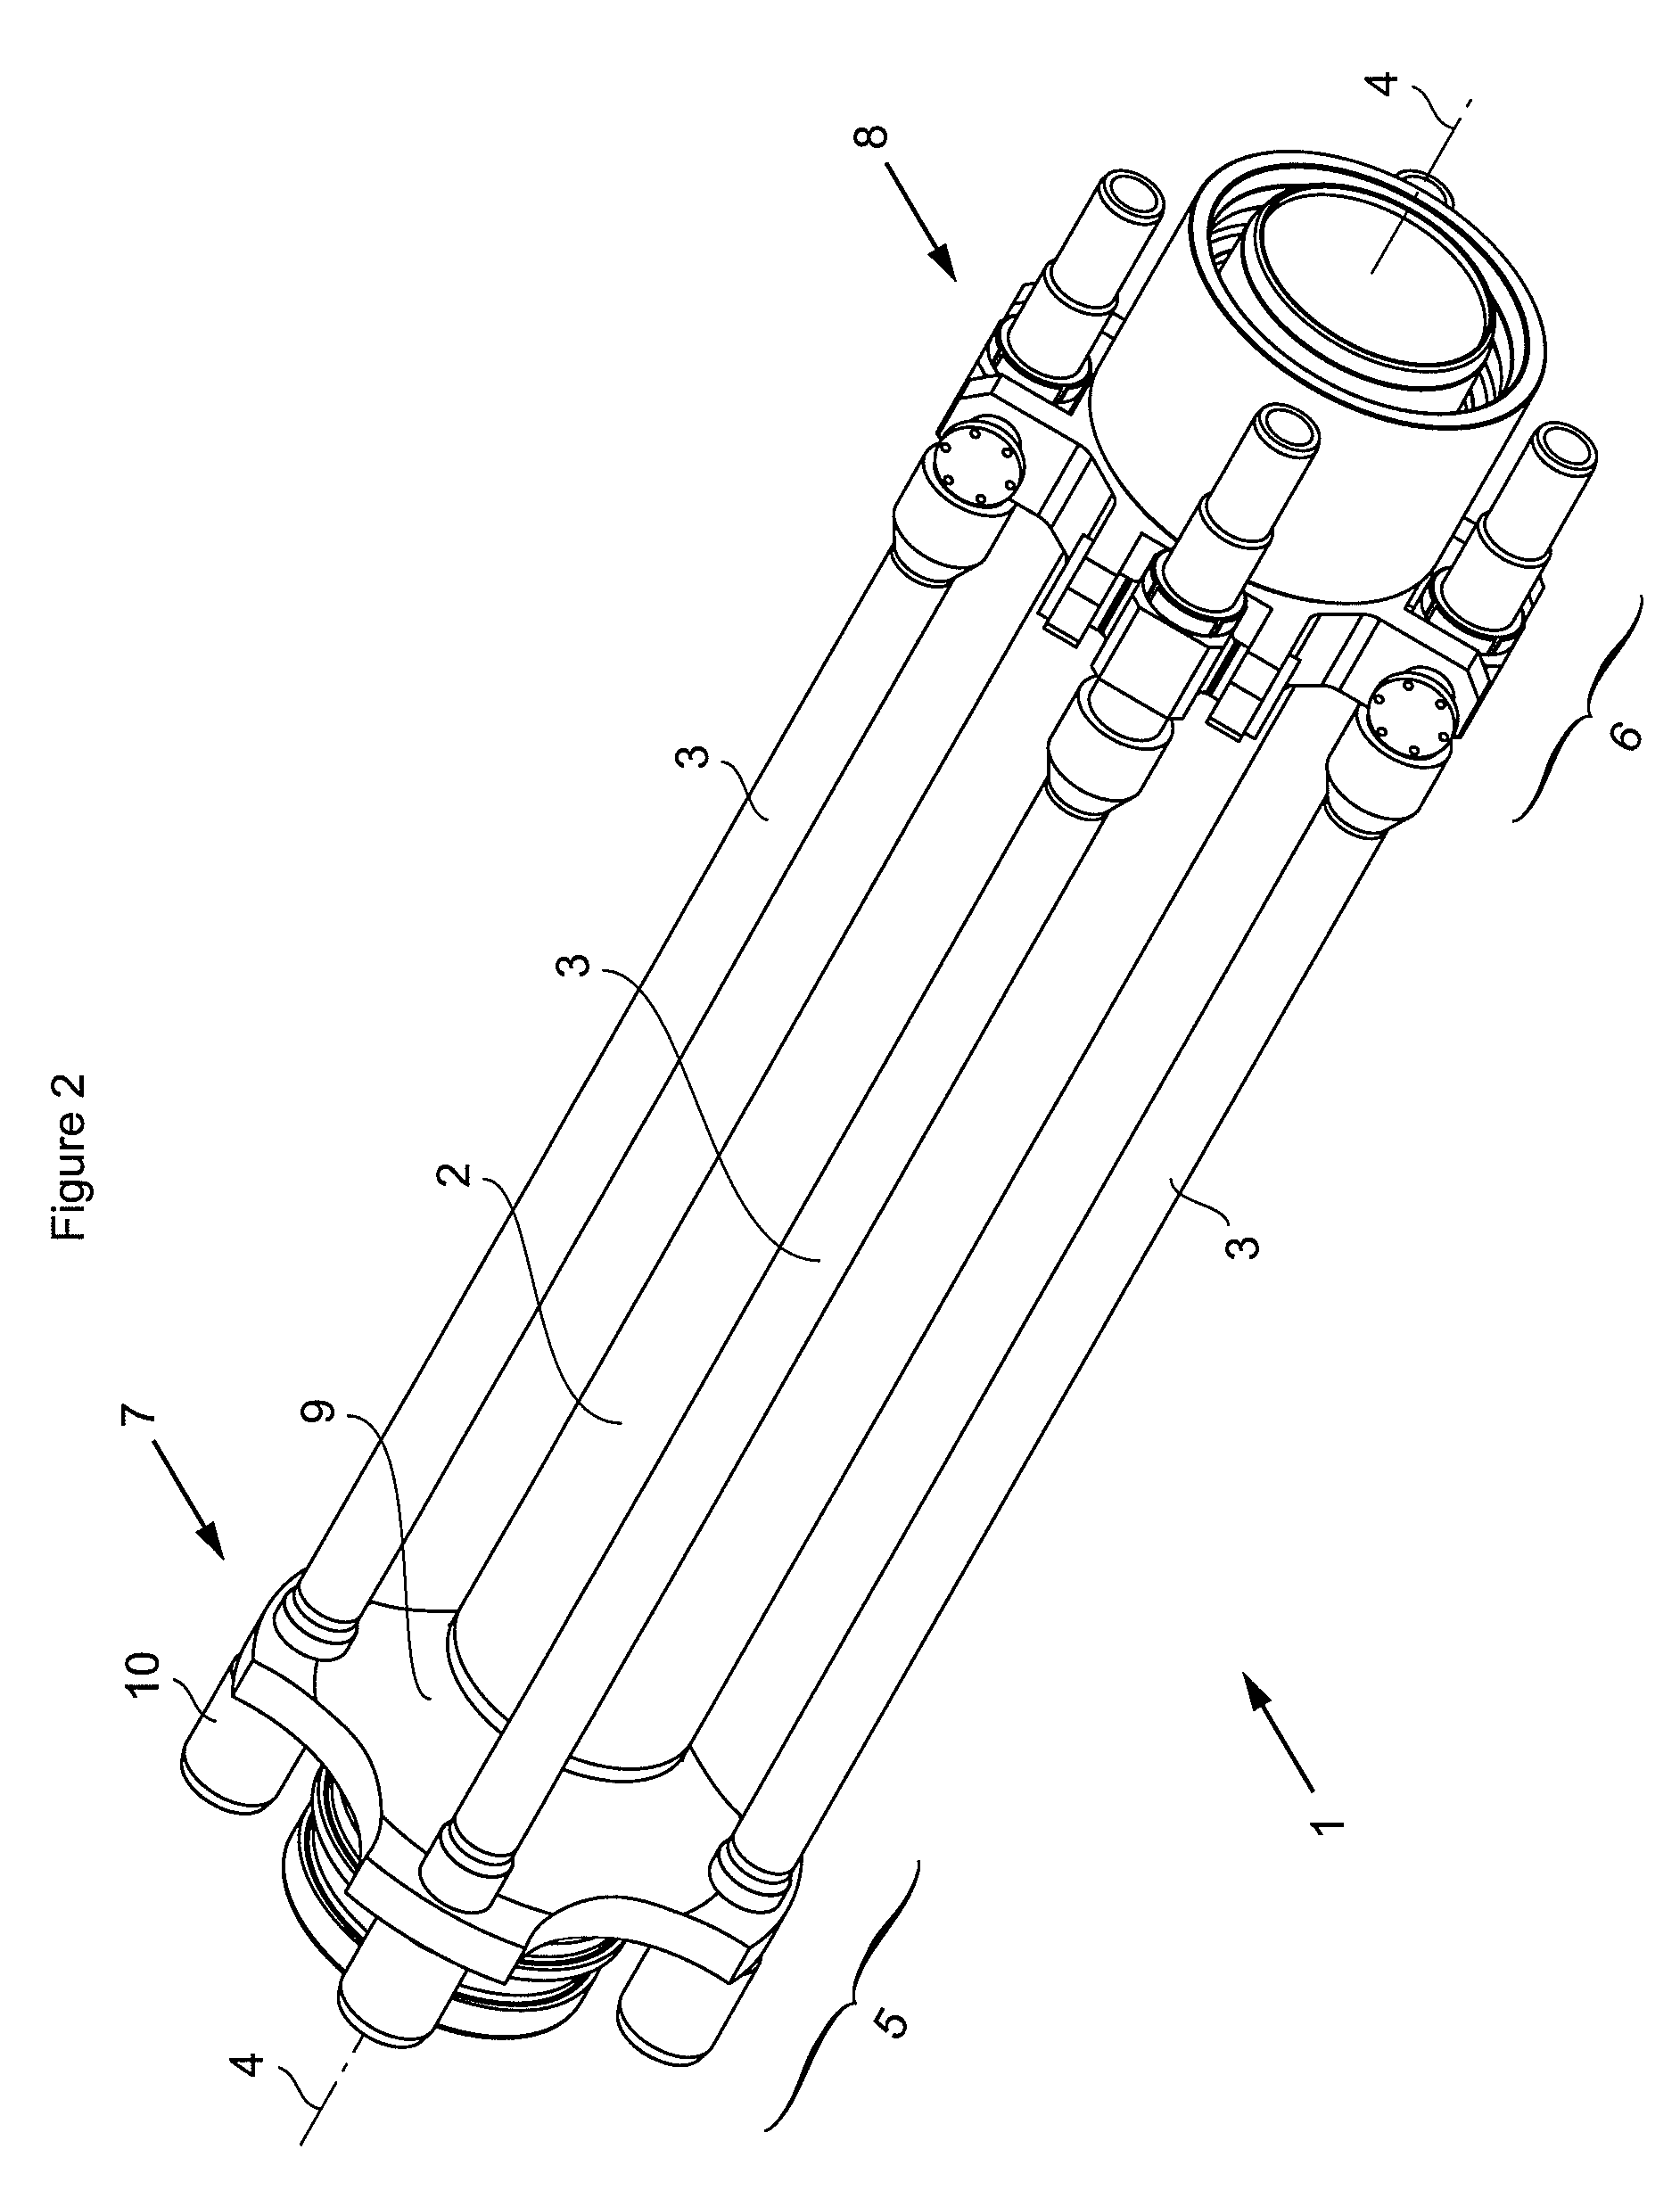 Riser pipe with auxiliary lines mounted on journals